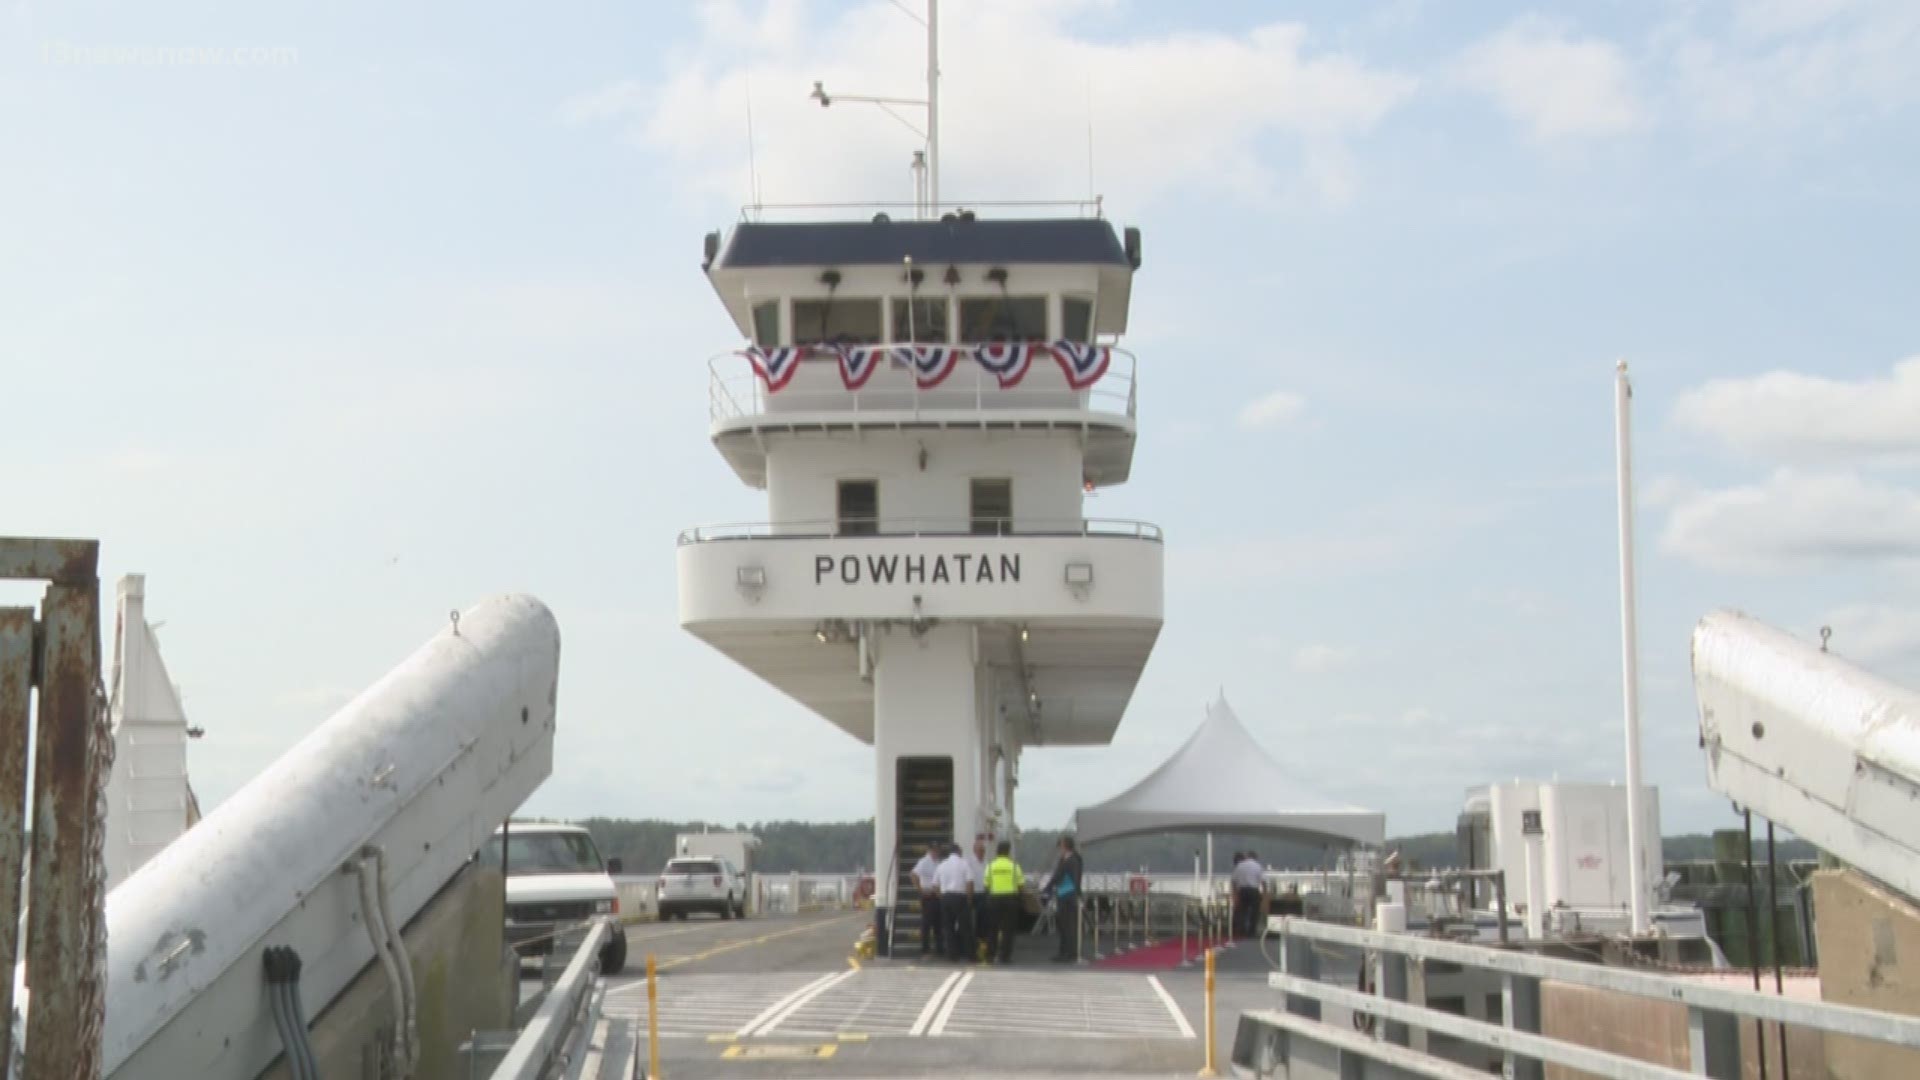 The Powhatan, replacing the Virginia, will operate on the Jamestown-Scotland Ferry System. It can carry 70 cars.